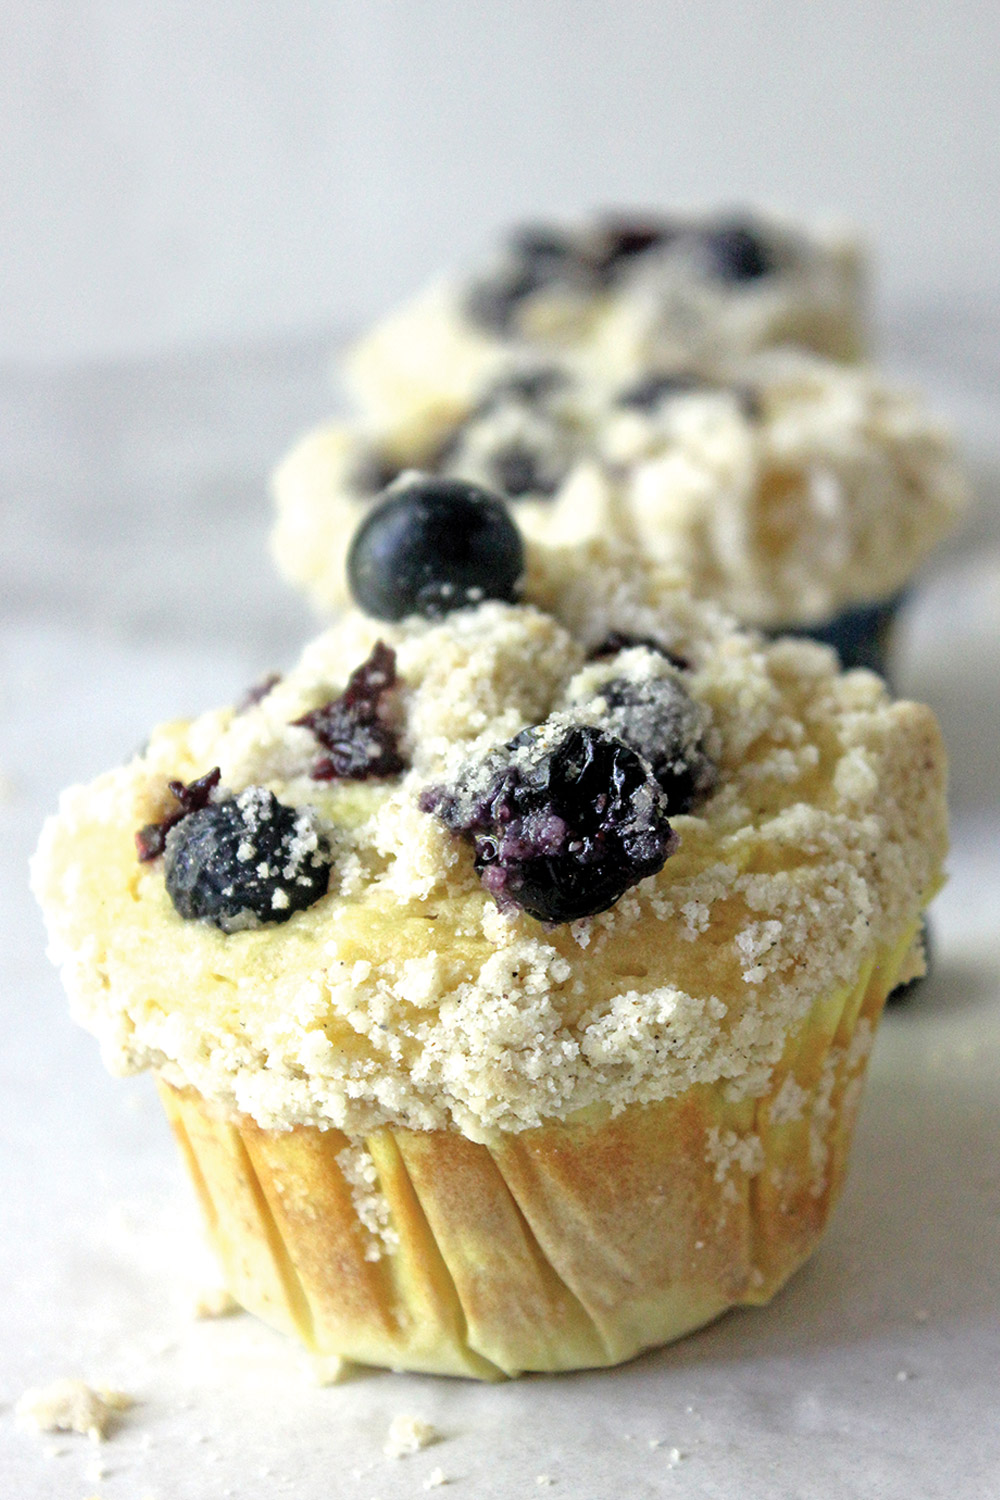 Cardamom blueberry muffins with crumble topping and blueberries lined up in a row.